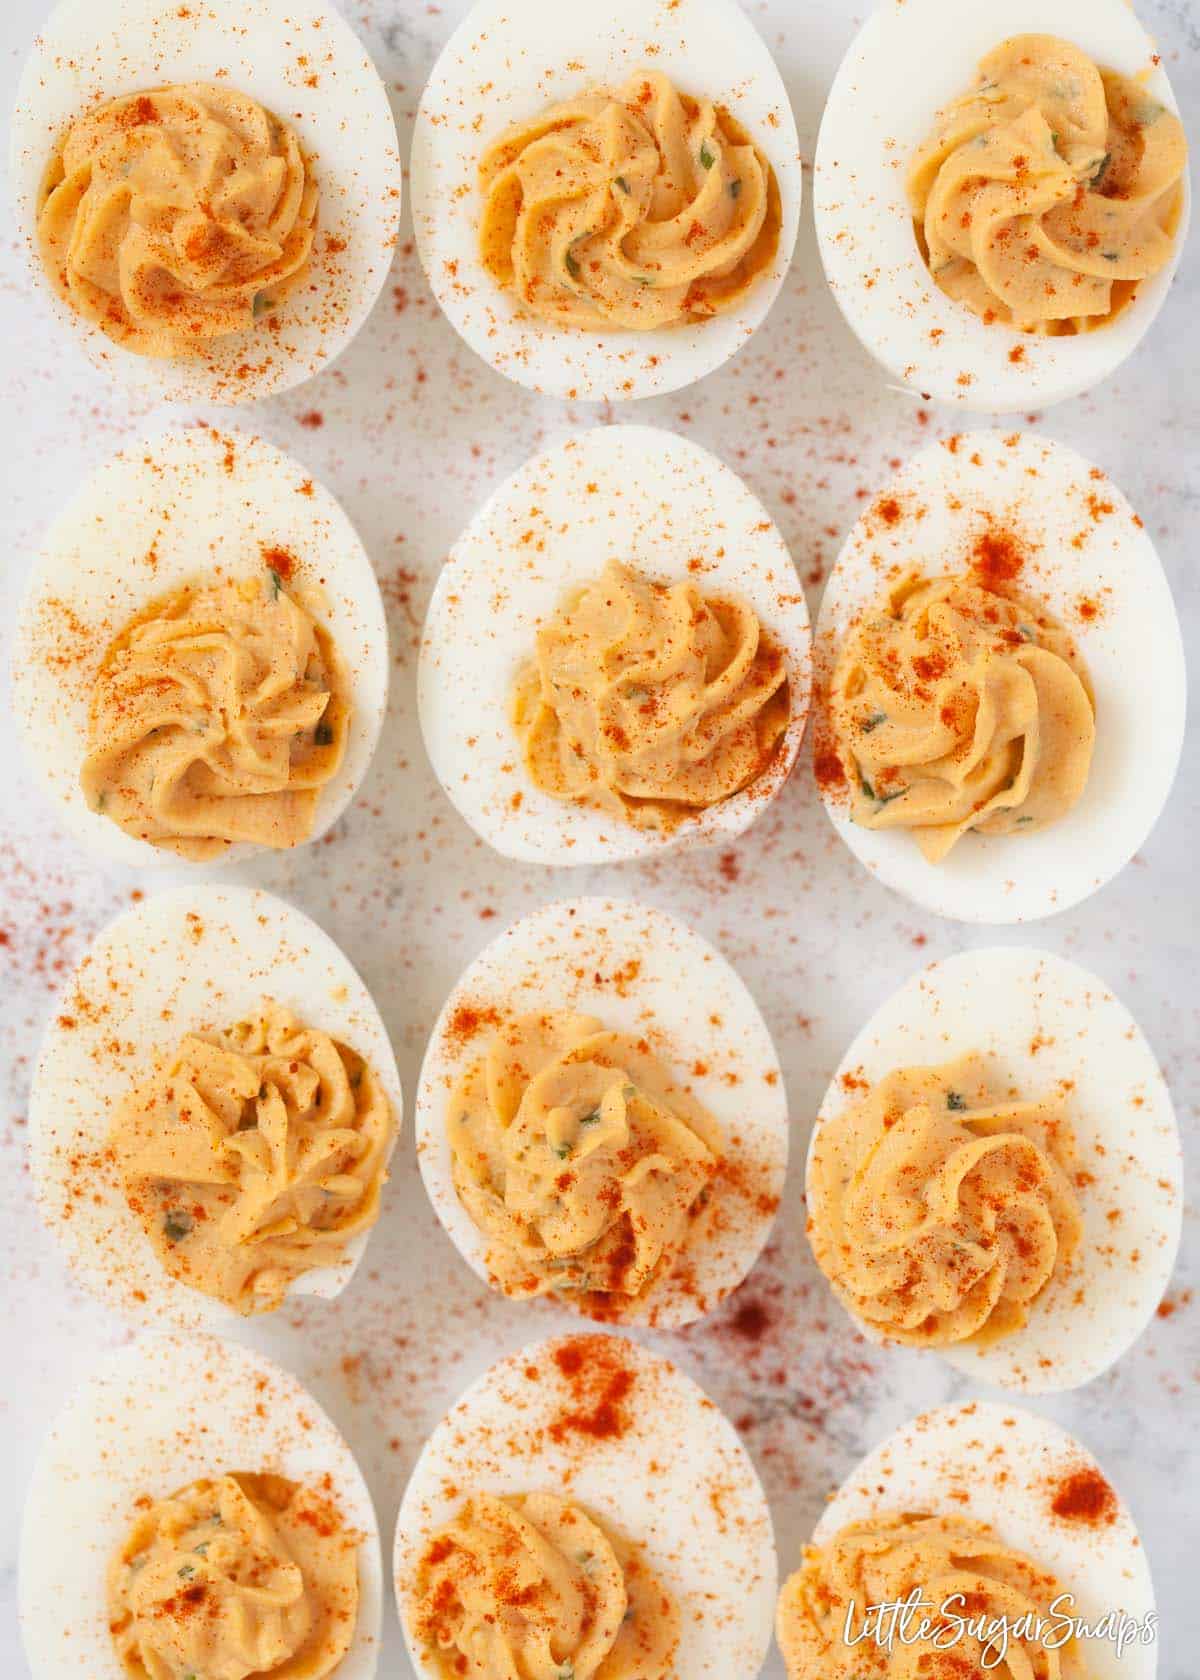 12 Devilled eggs on a worktop dusted with paprika